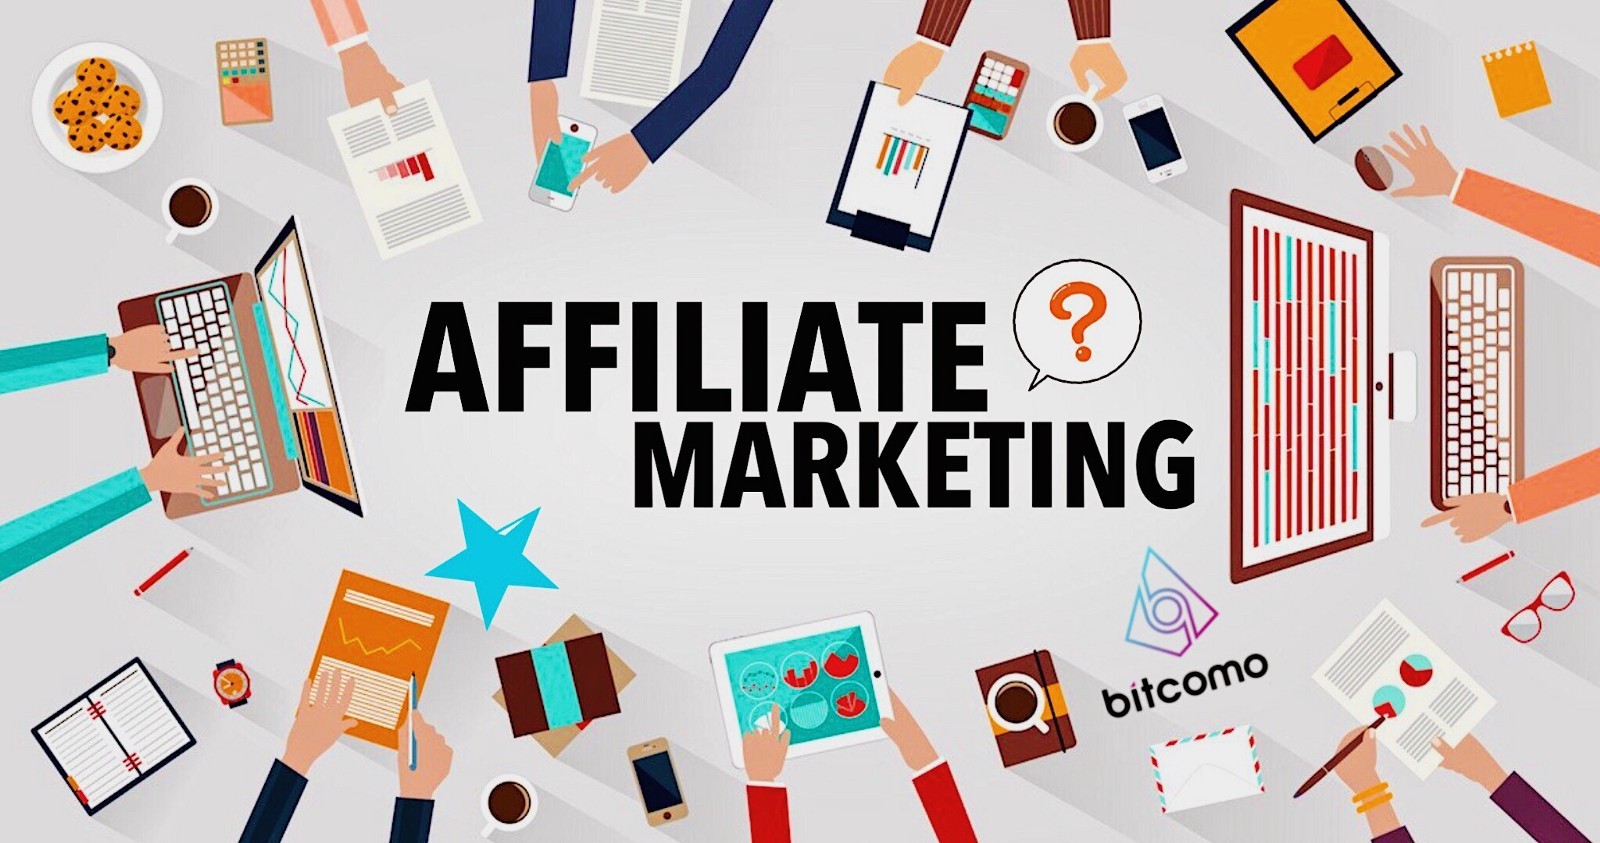 How to use affiliate marketing for SEO